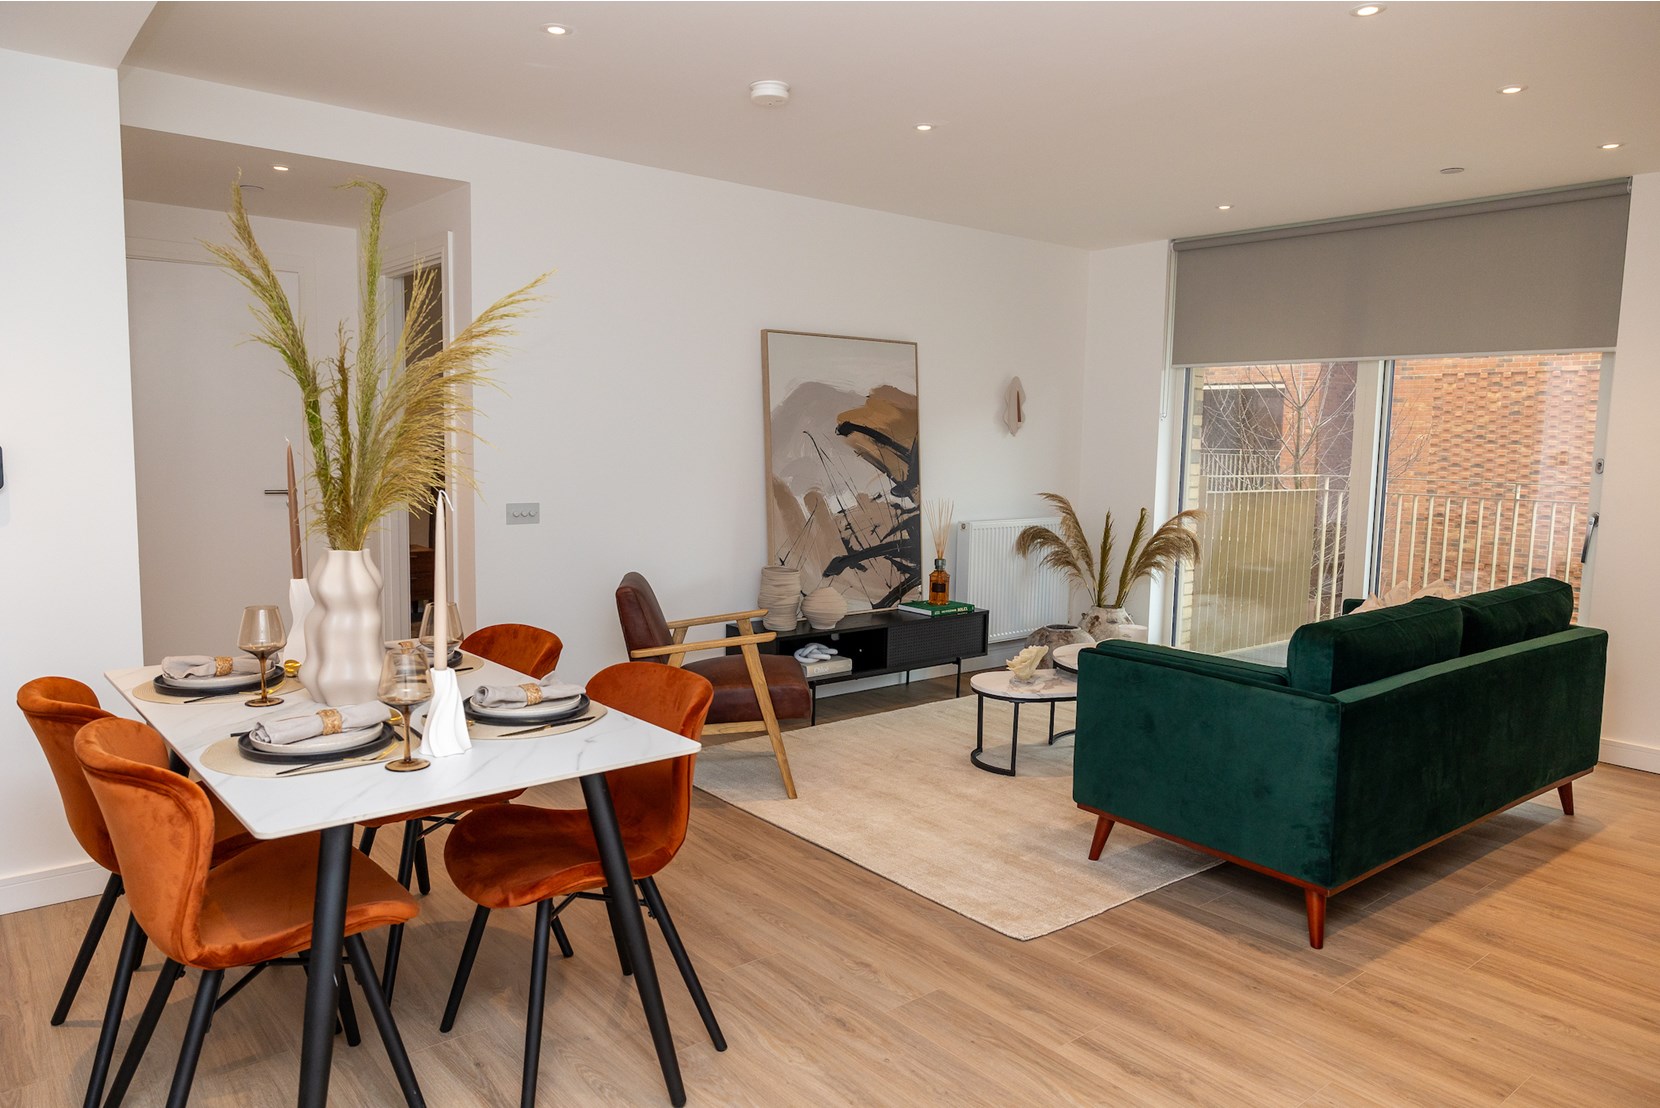 Apartments to Rent by Populo Living at The Brickyard, Newham, E6, living dining area